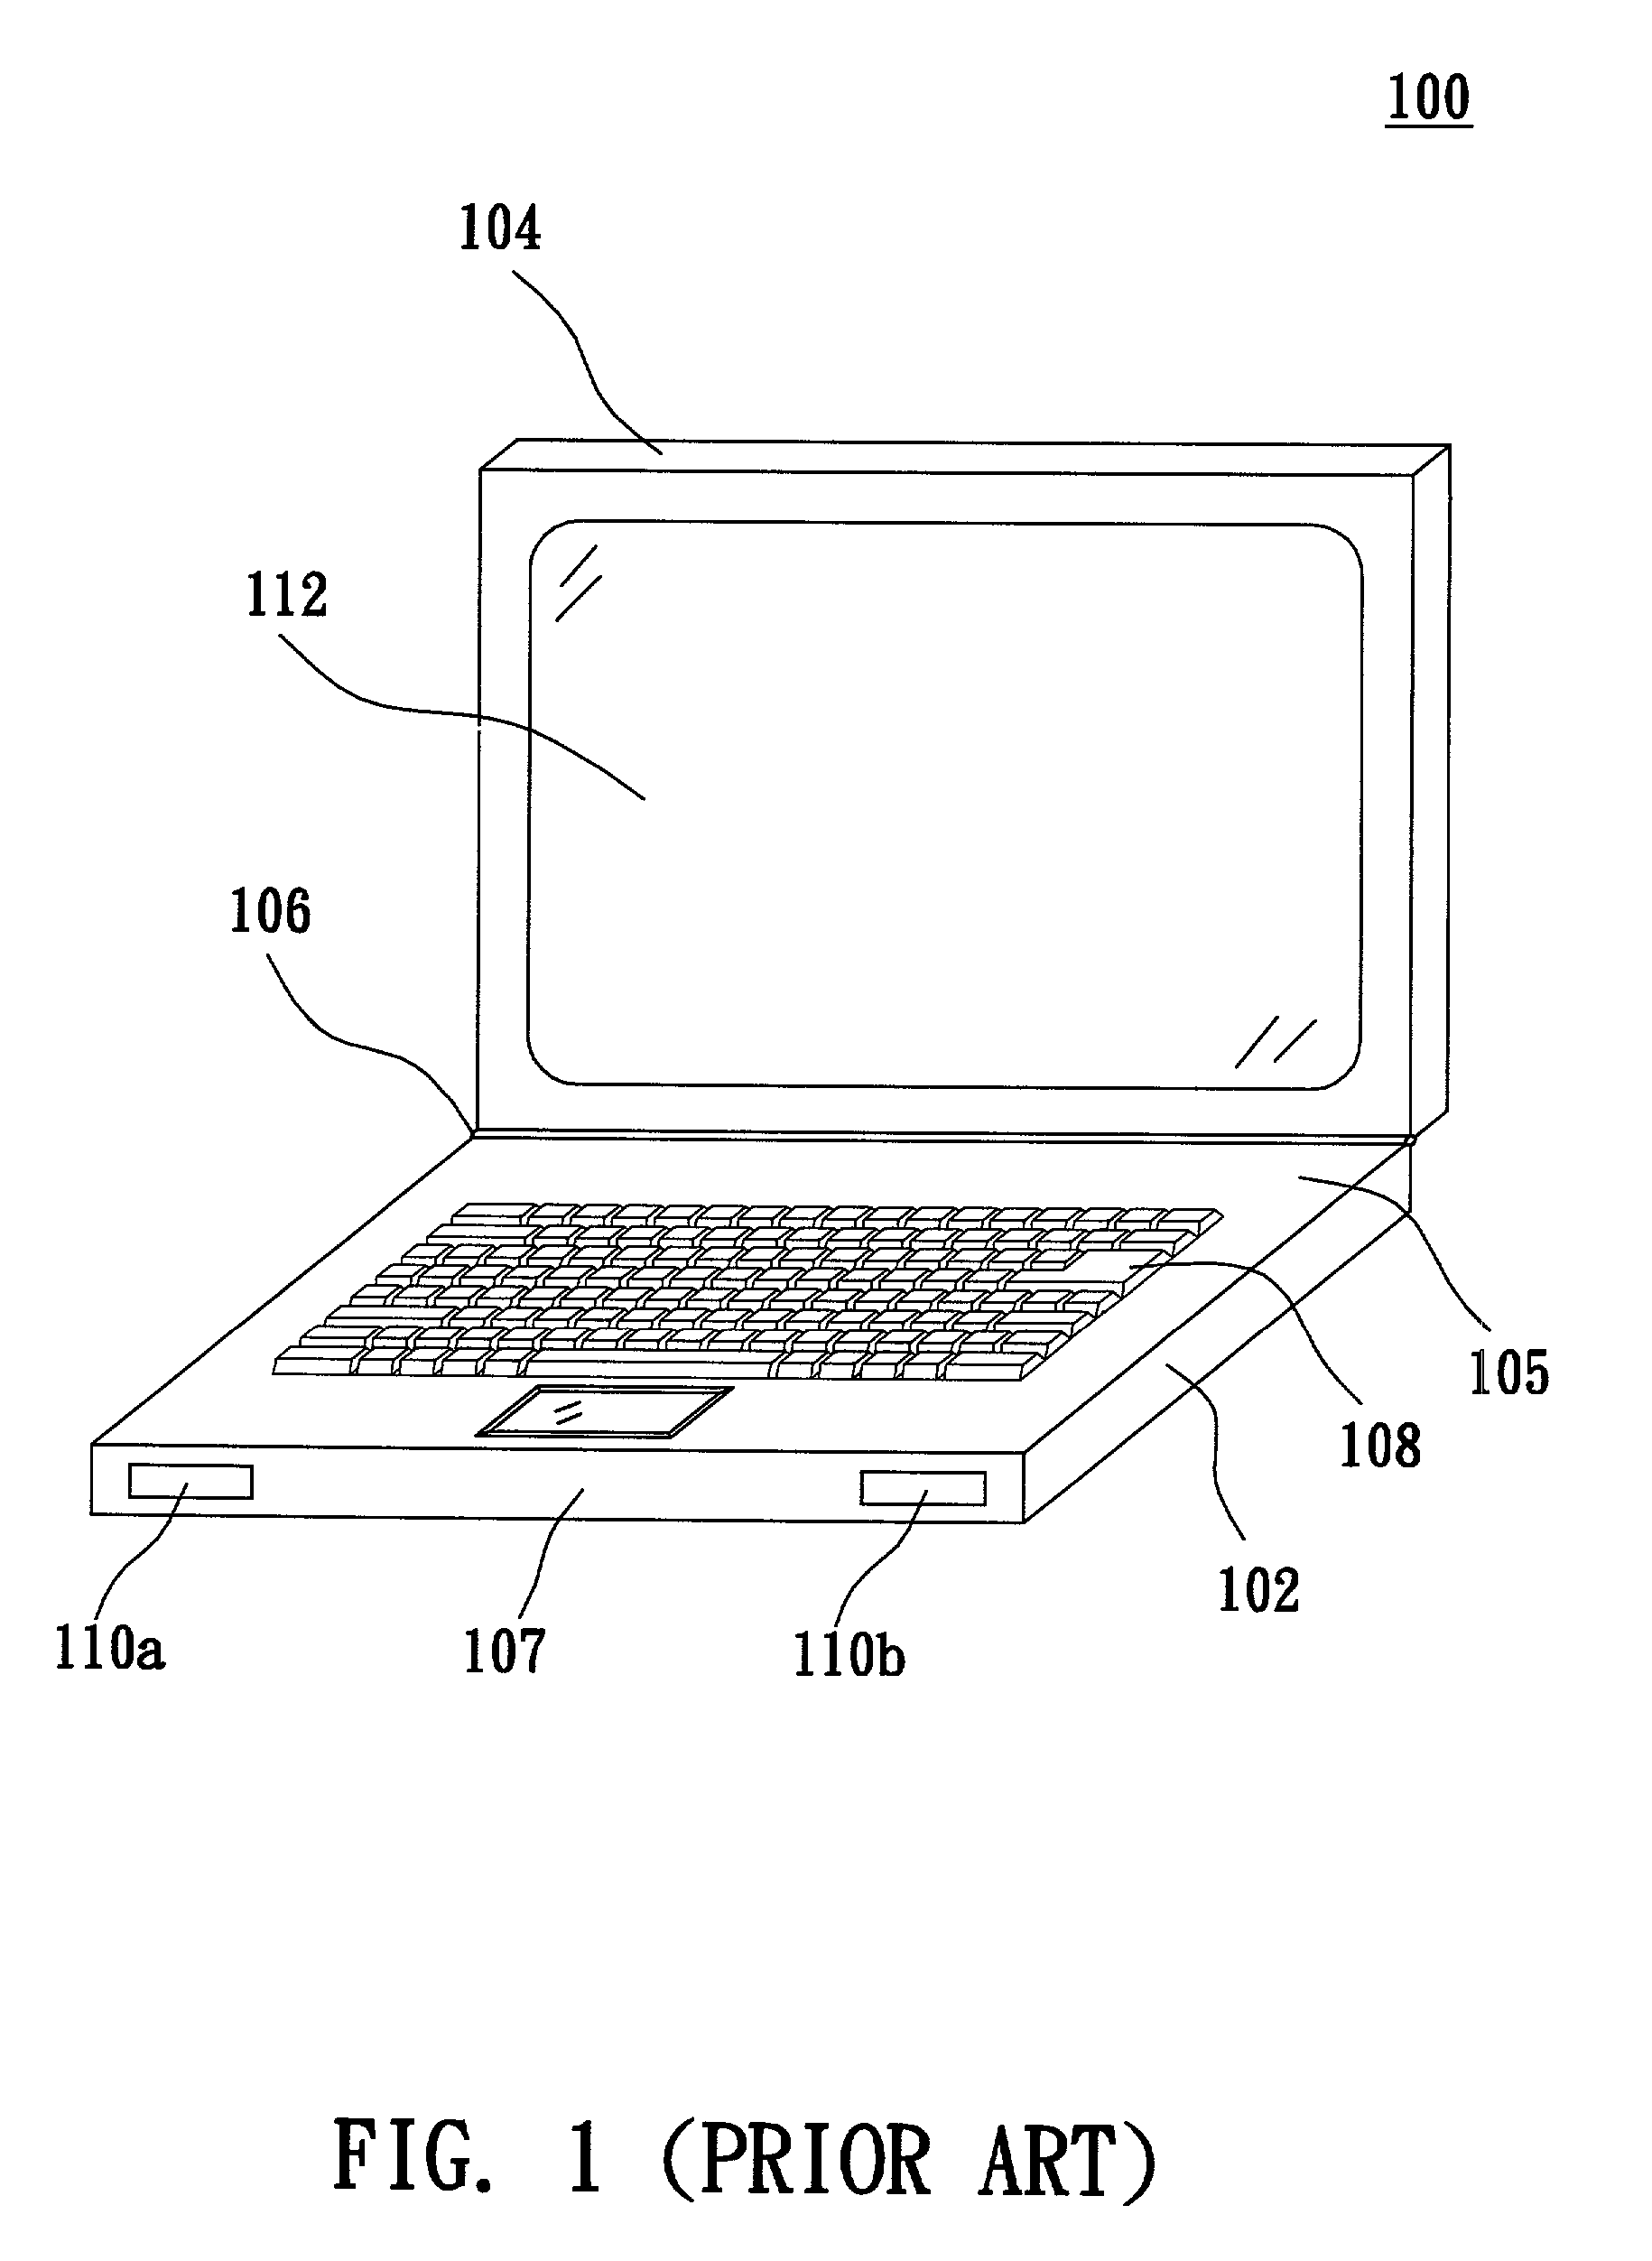 Notebook computer with folding speaker device